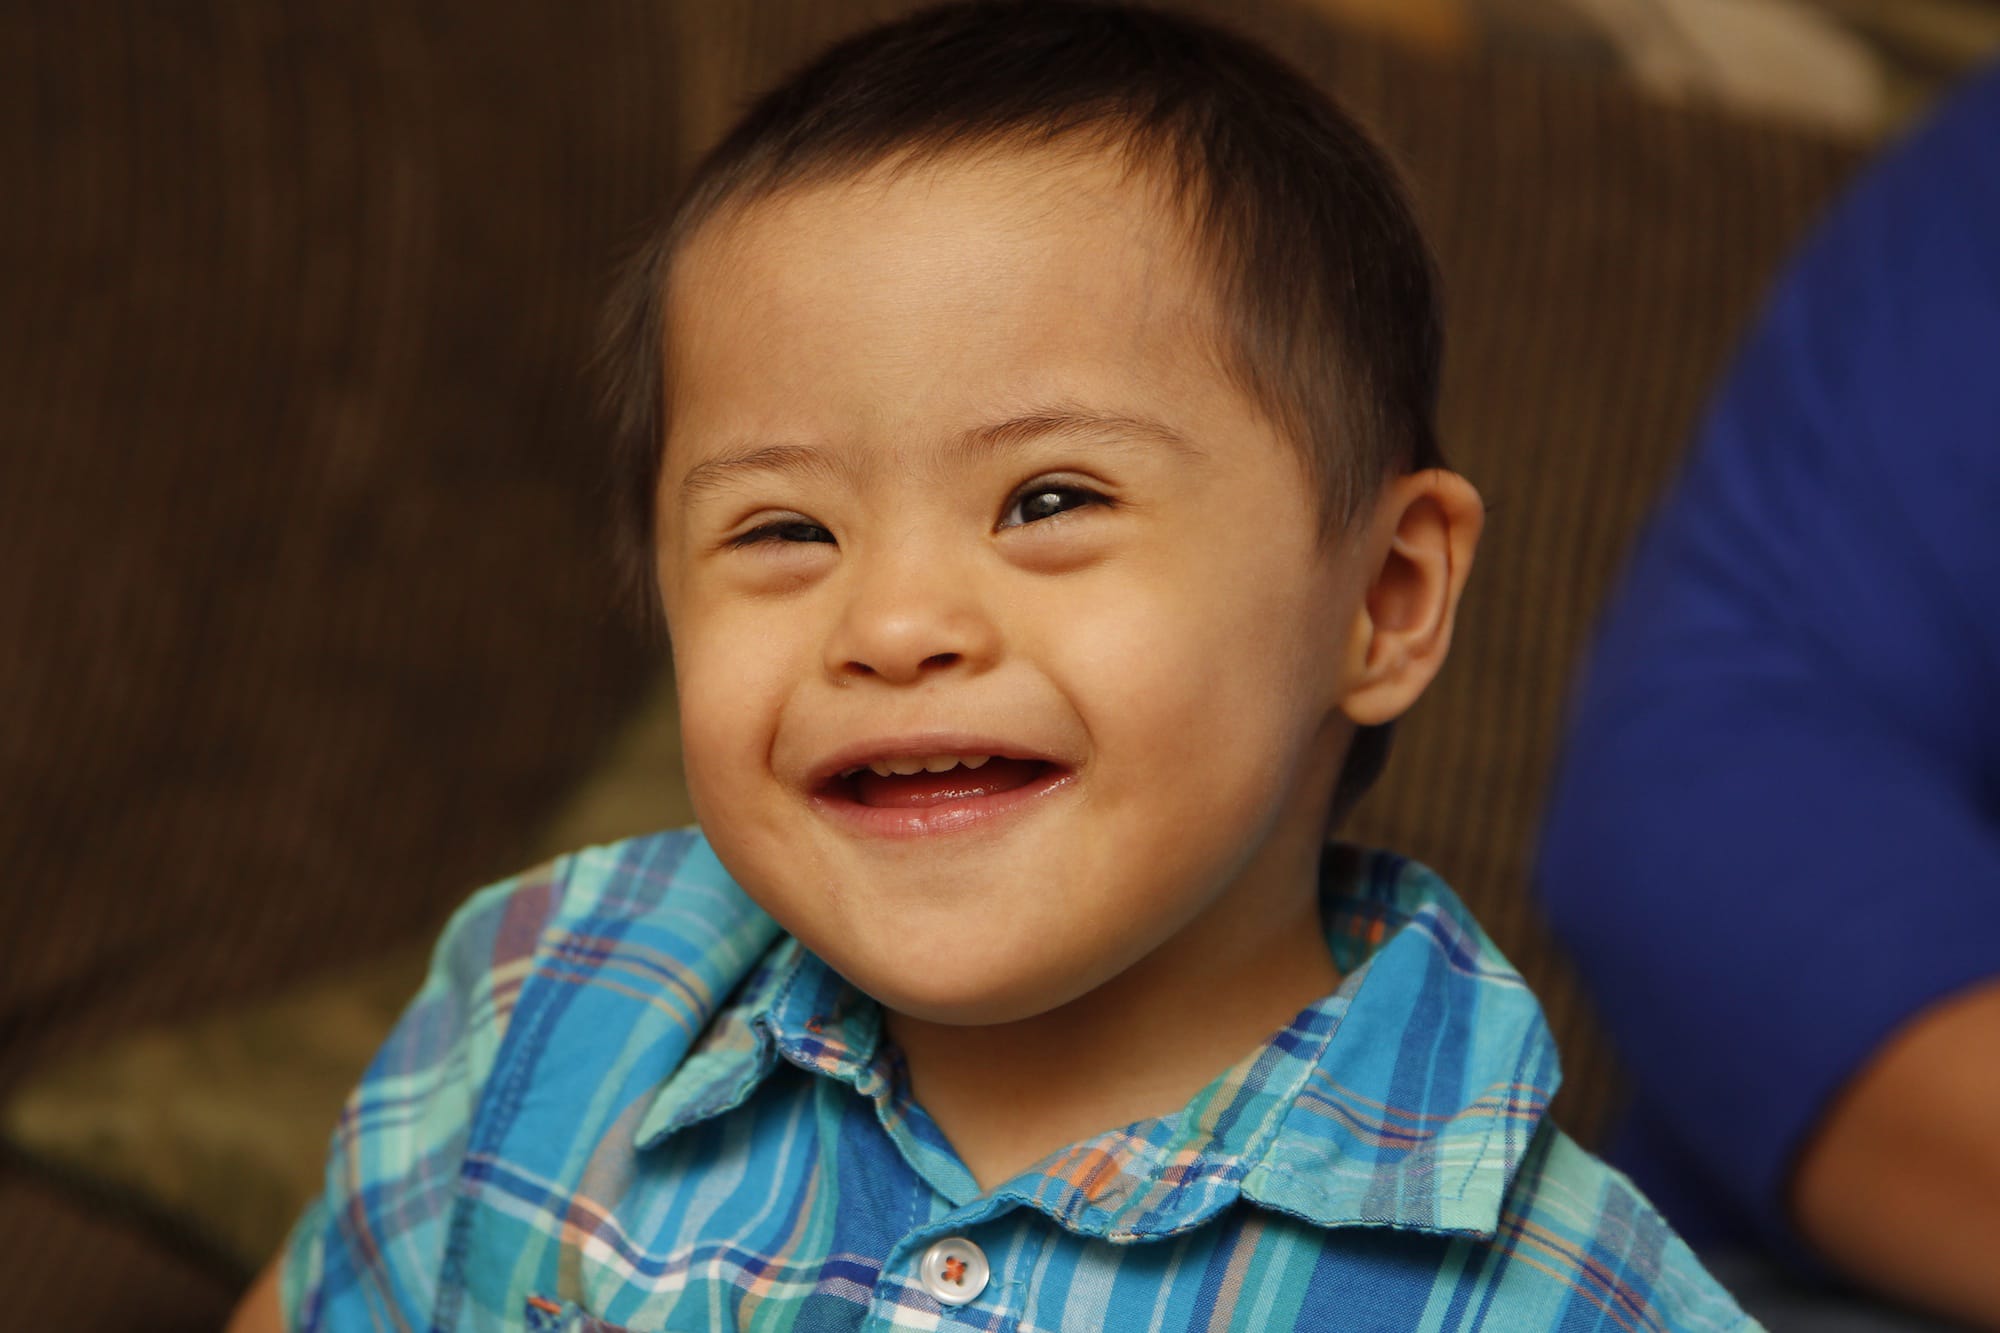 Nathan Magdaleno, 2, of Vancouver was recently named a 2014 Community Hero by the Children's Cancer Association.